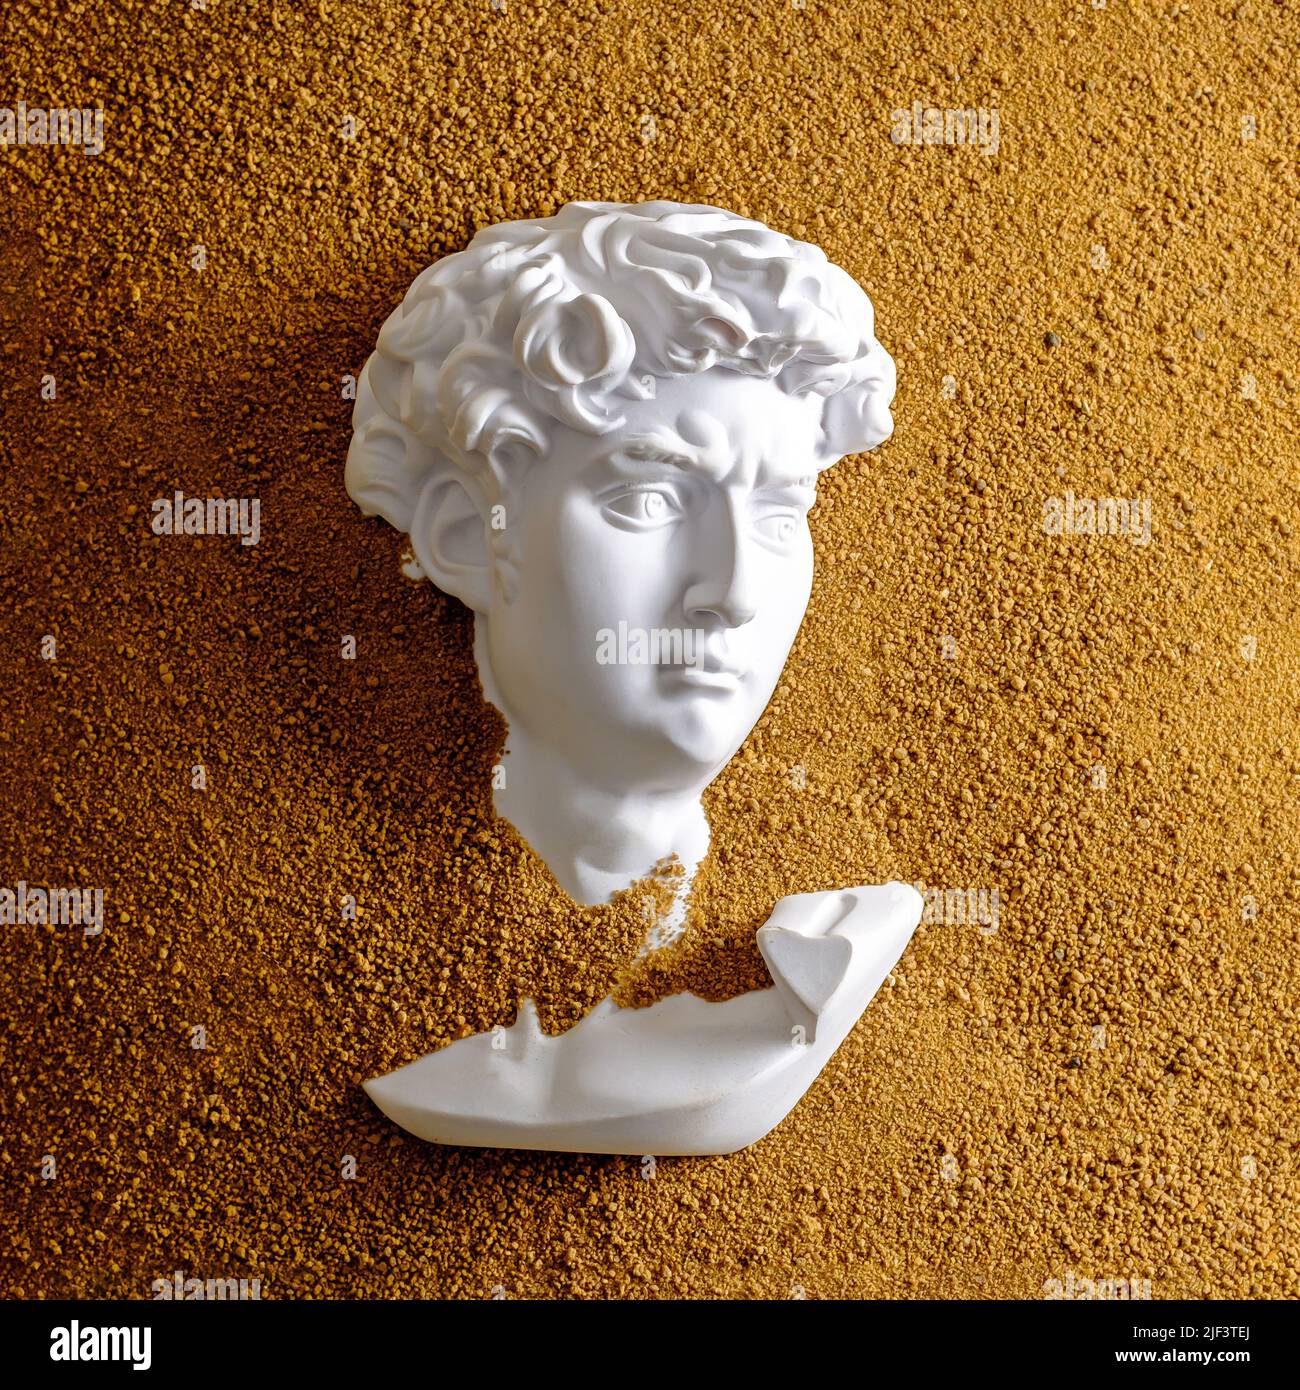 Gypsum David head in dune or sand. Creative concept excavation story and texture effect. Stock Photo